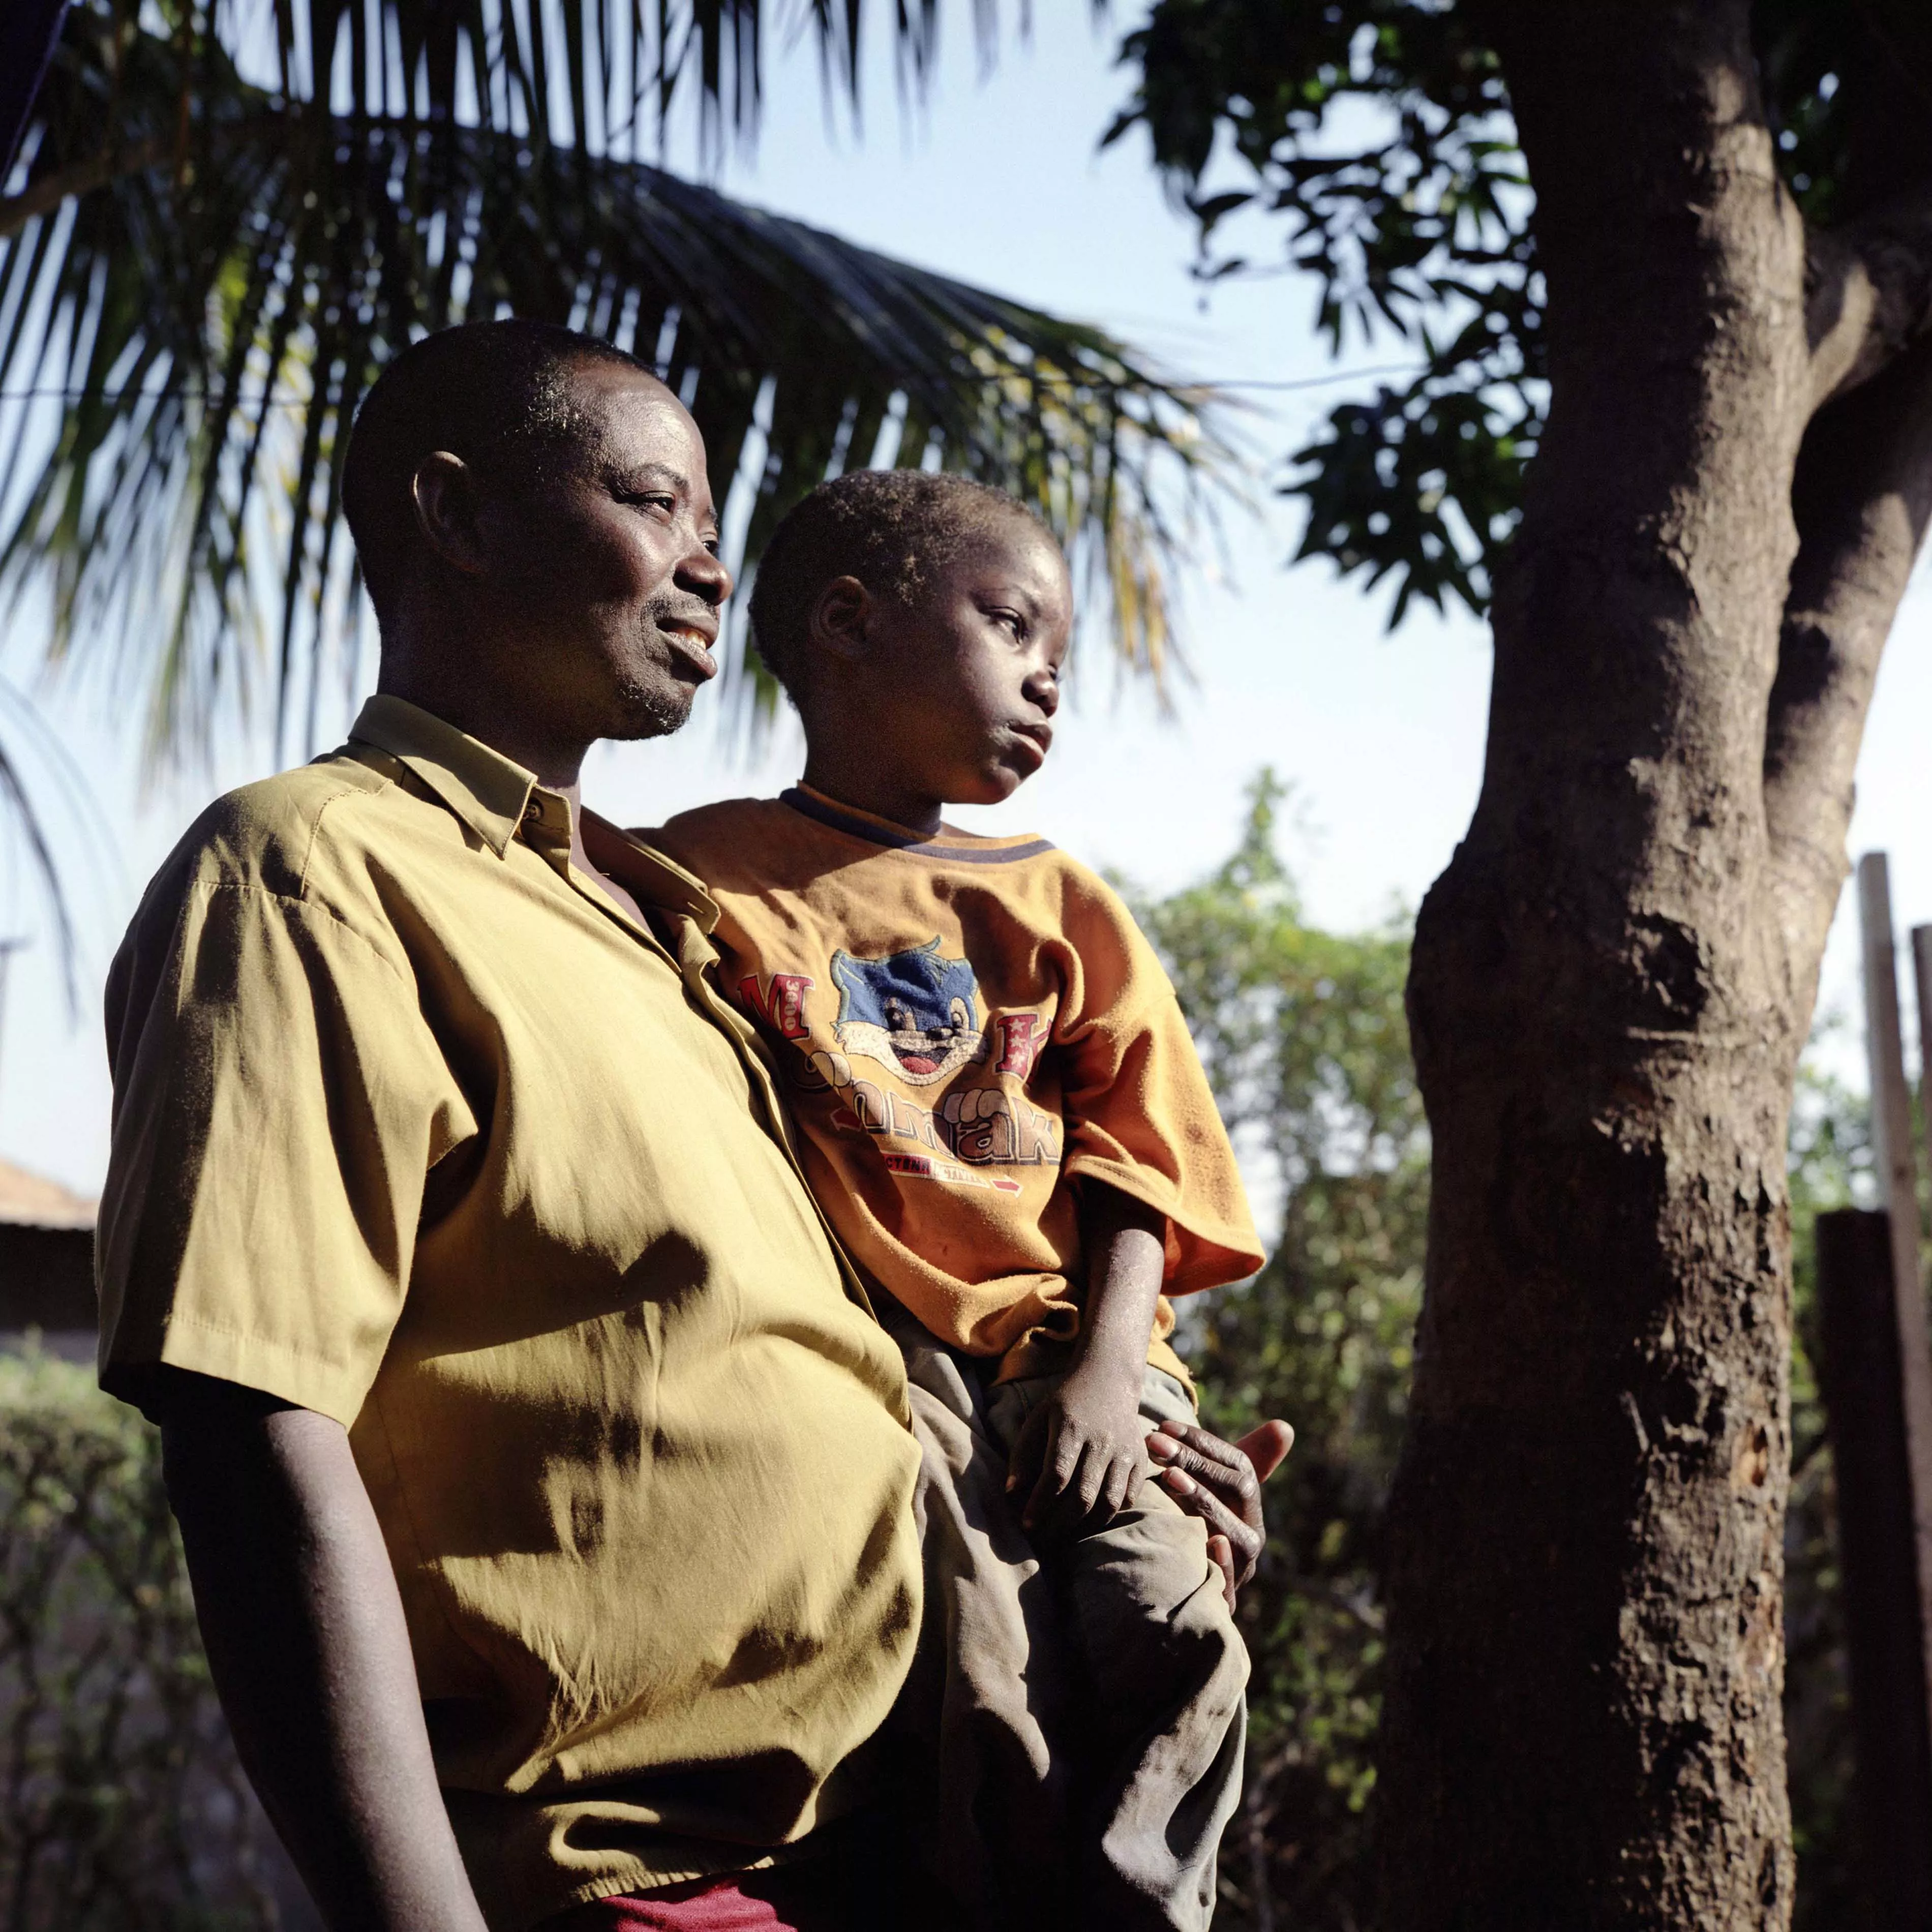 Matateu and his child, seropositive, having a walk in Ferroviario, Mozambique. Matateu, 41 years old, is under ARV treatment since 2003.